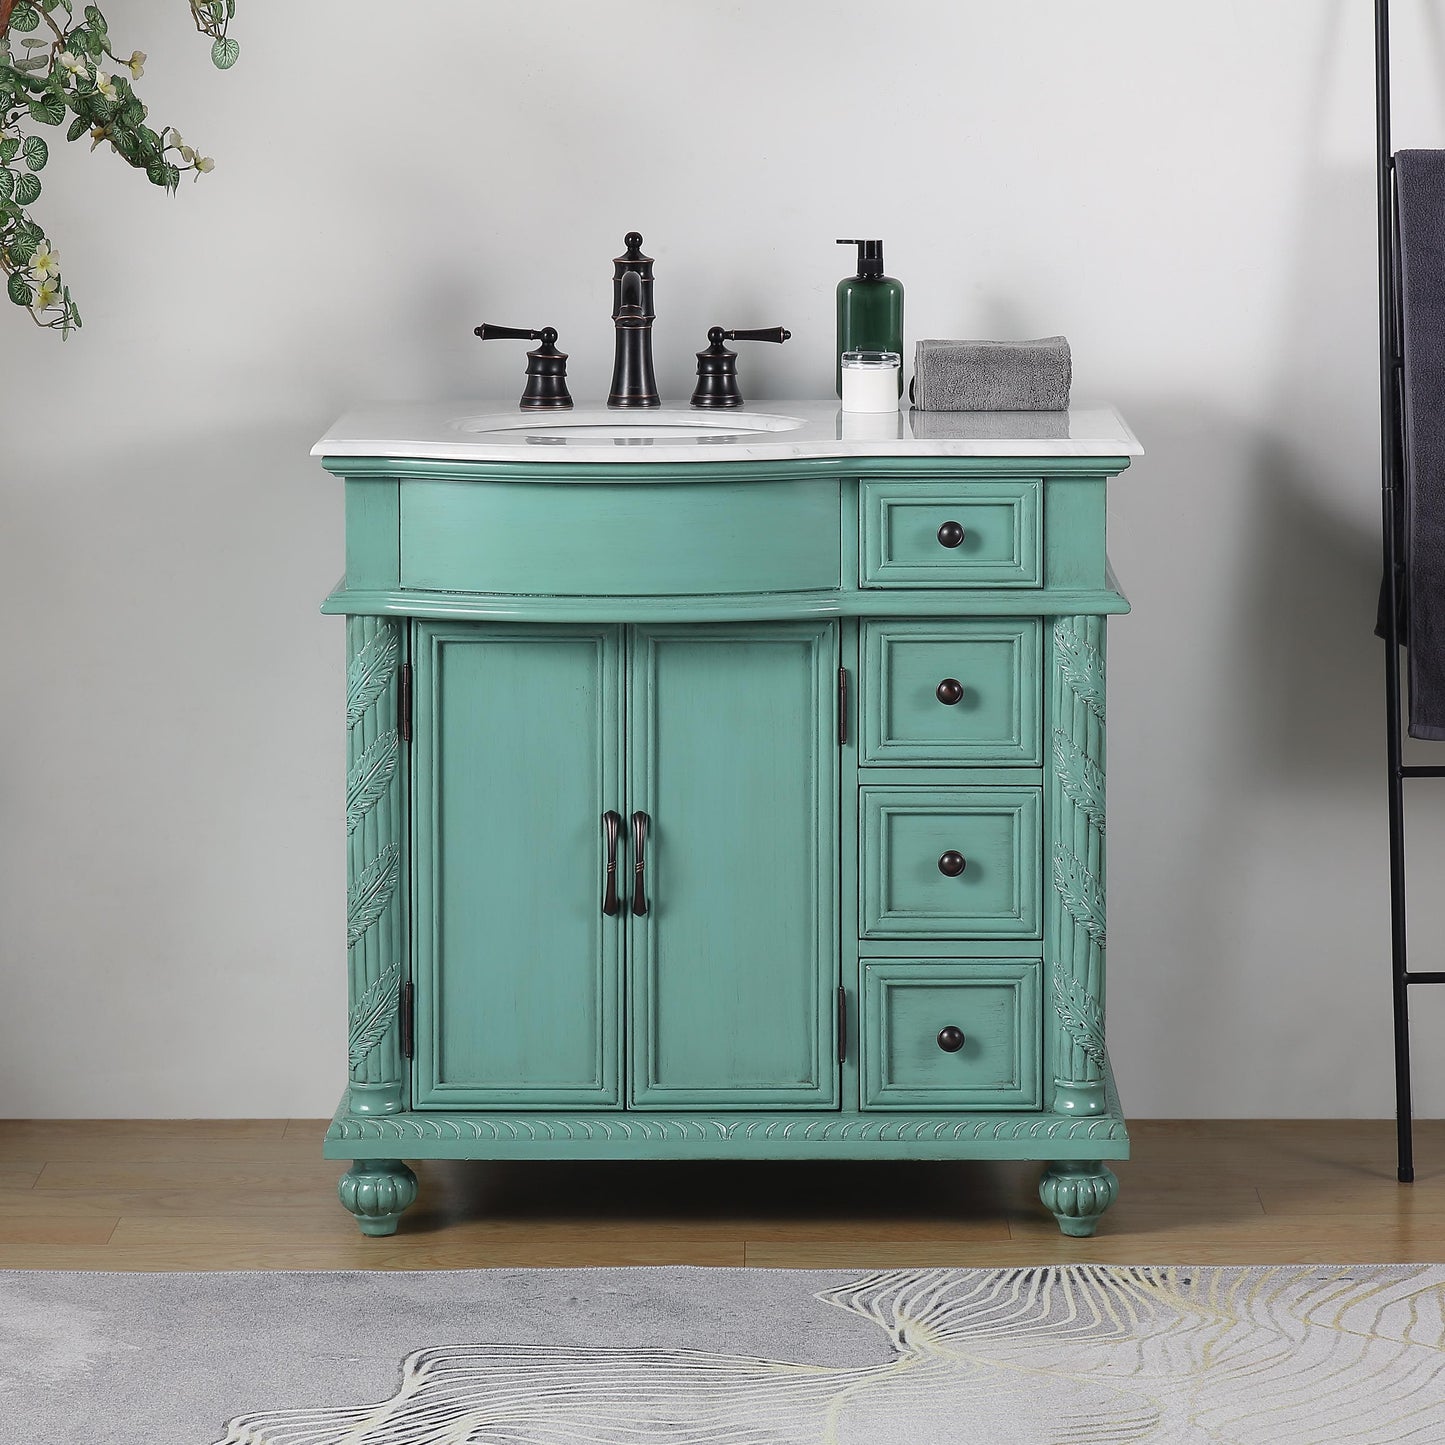 Silkroad Exclusive Silkroad Exclusive 36” Left Single Sink Green Bathroom Vanity with White Marble Top V0213NW36L